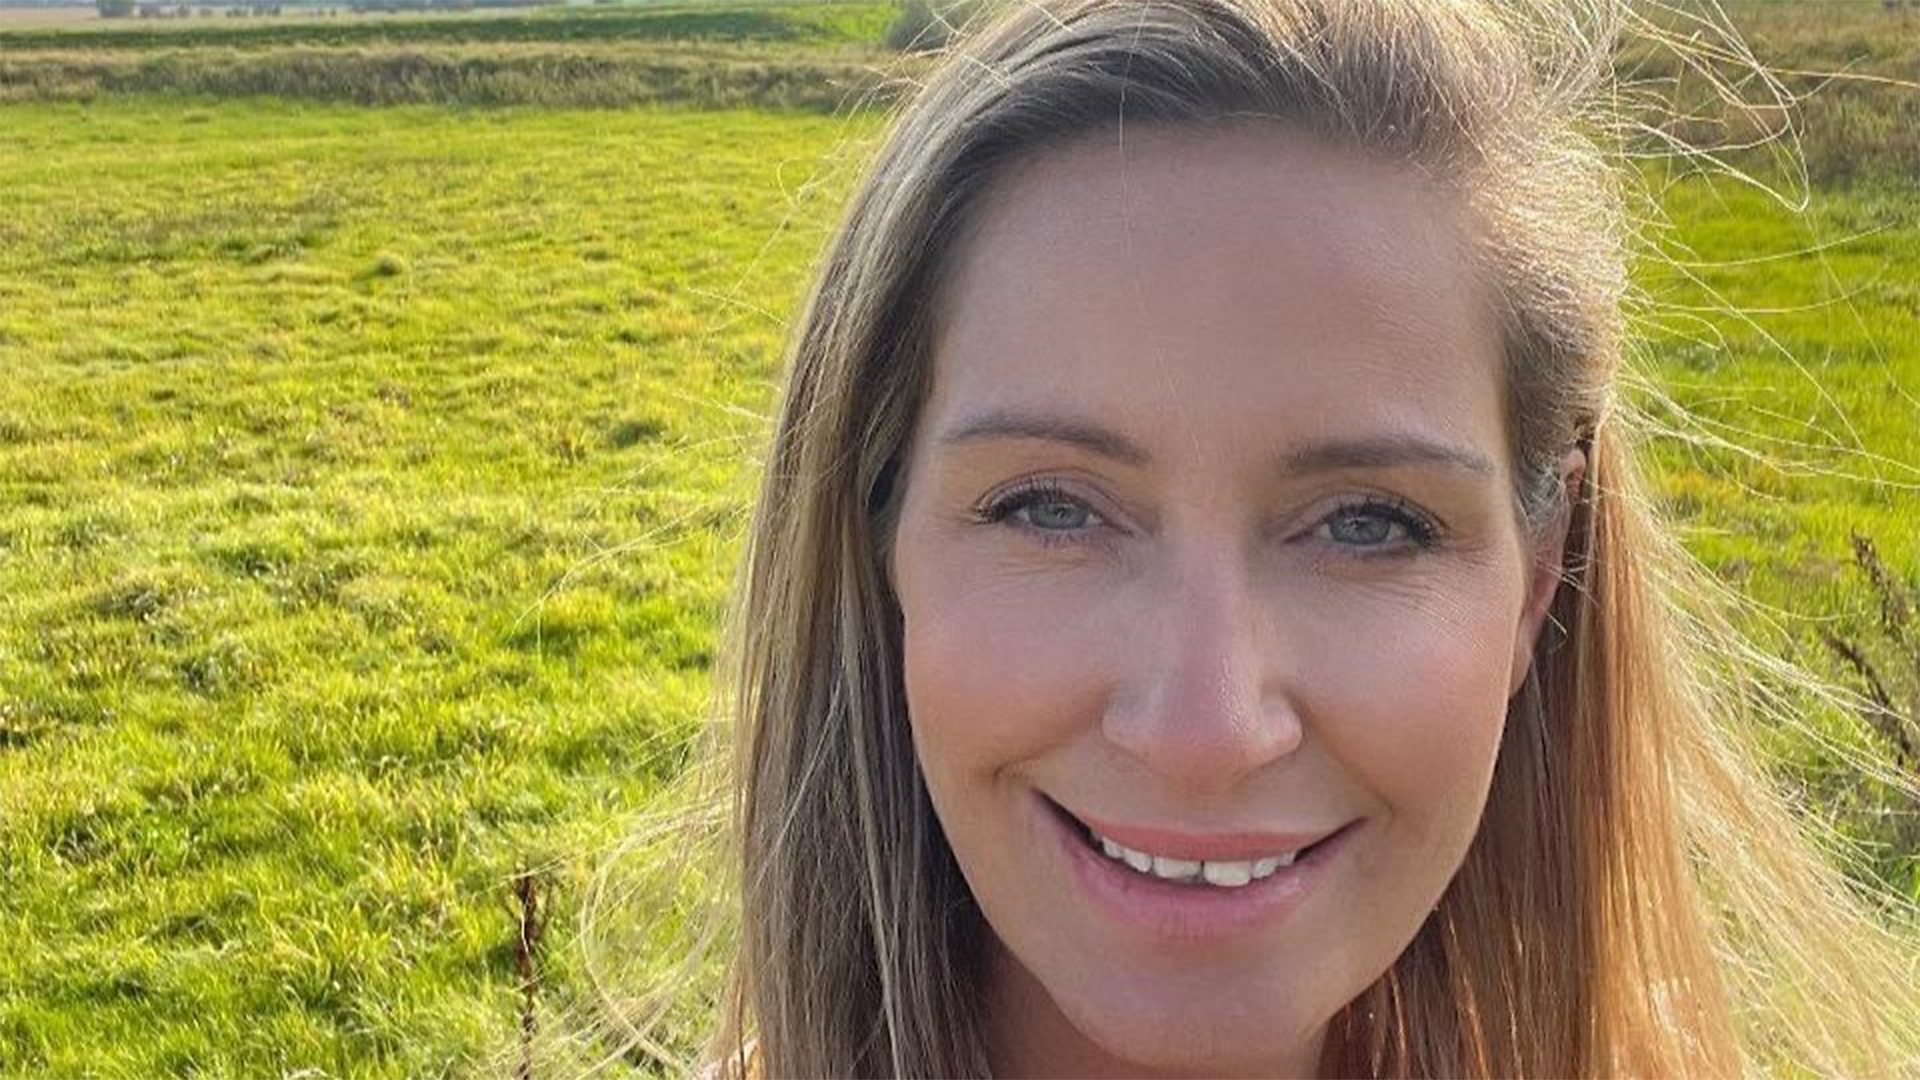 BBC Factual announces new documentary telling the inside story of Nicola Bulley's disappearance